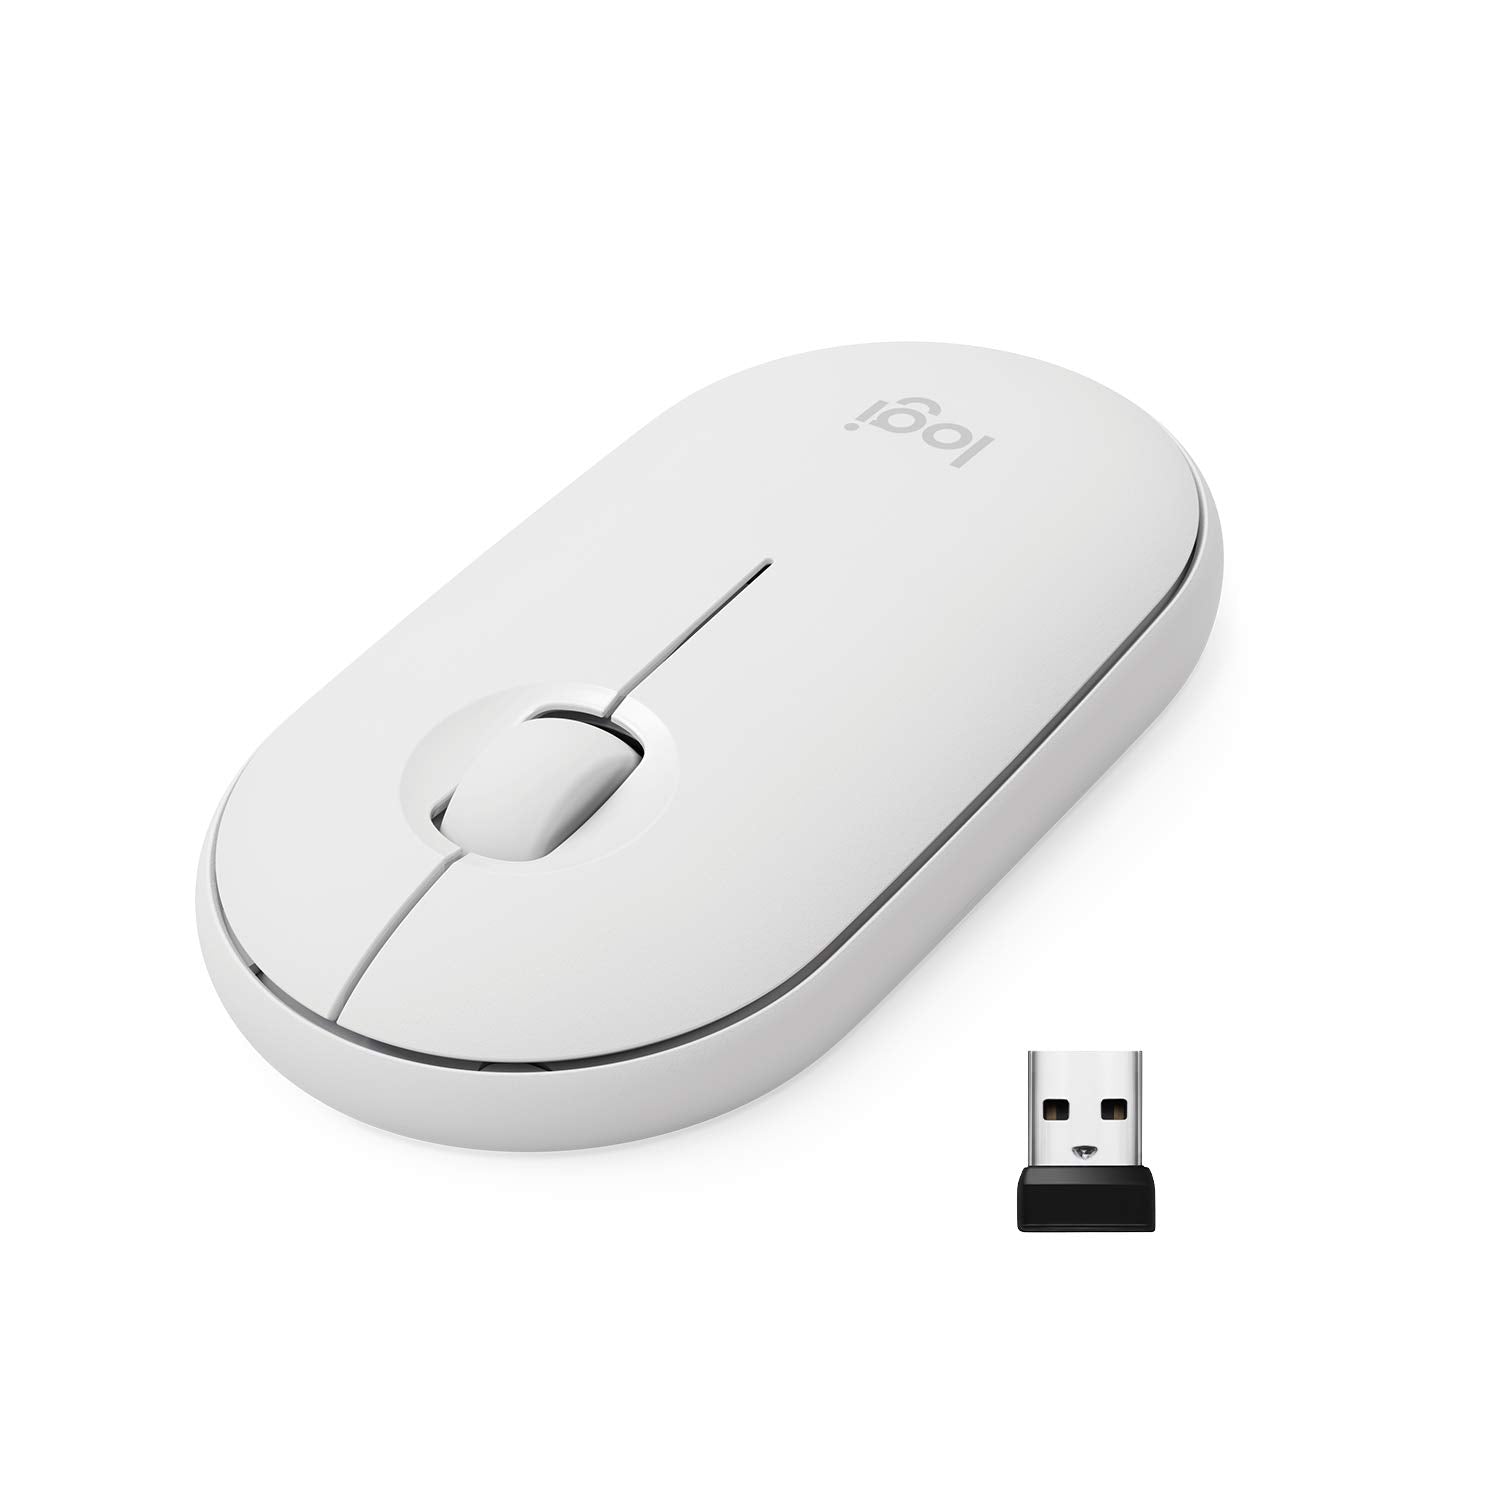 Logitech Pebble Wireless Mouse, Bluetooth or 2.4 GHz with USB Mini-Receiver, Silent, Slim Computer Mouse with Quiet Click for Laptop/Notebook/PC/Mac - White